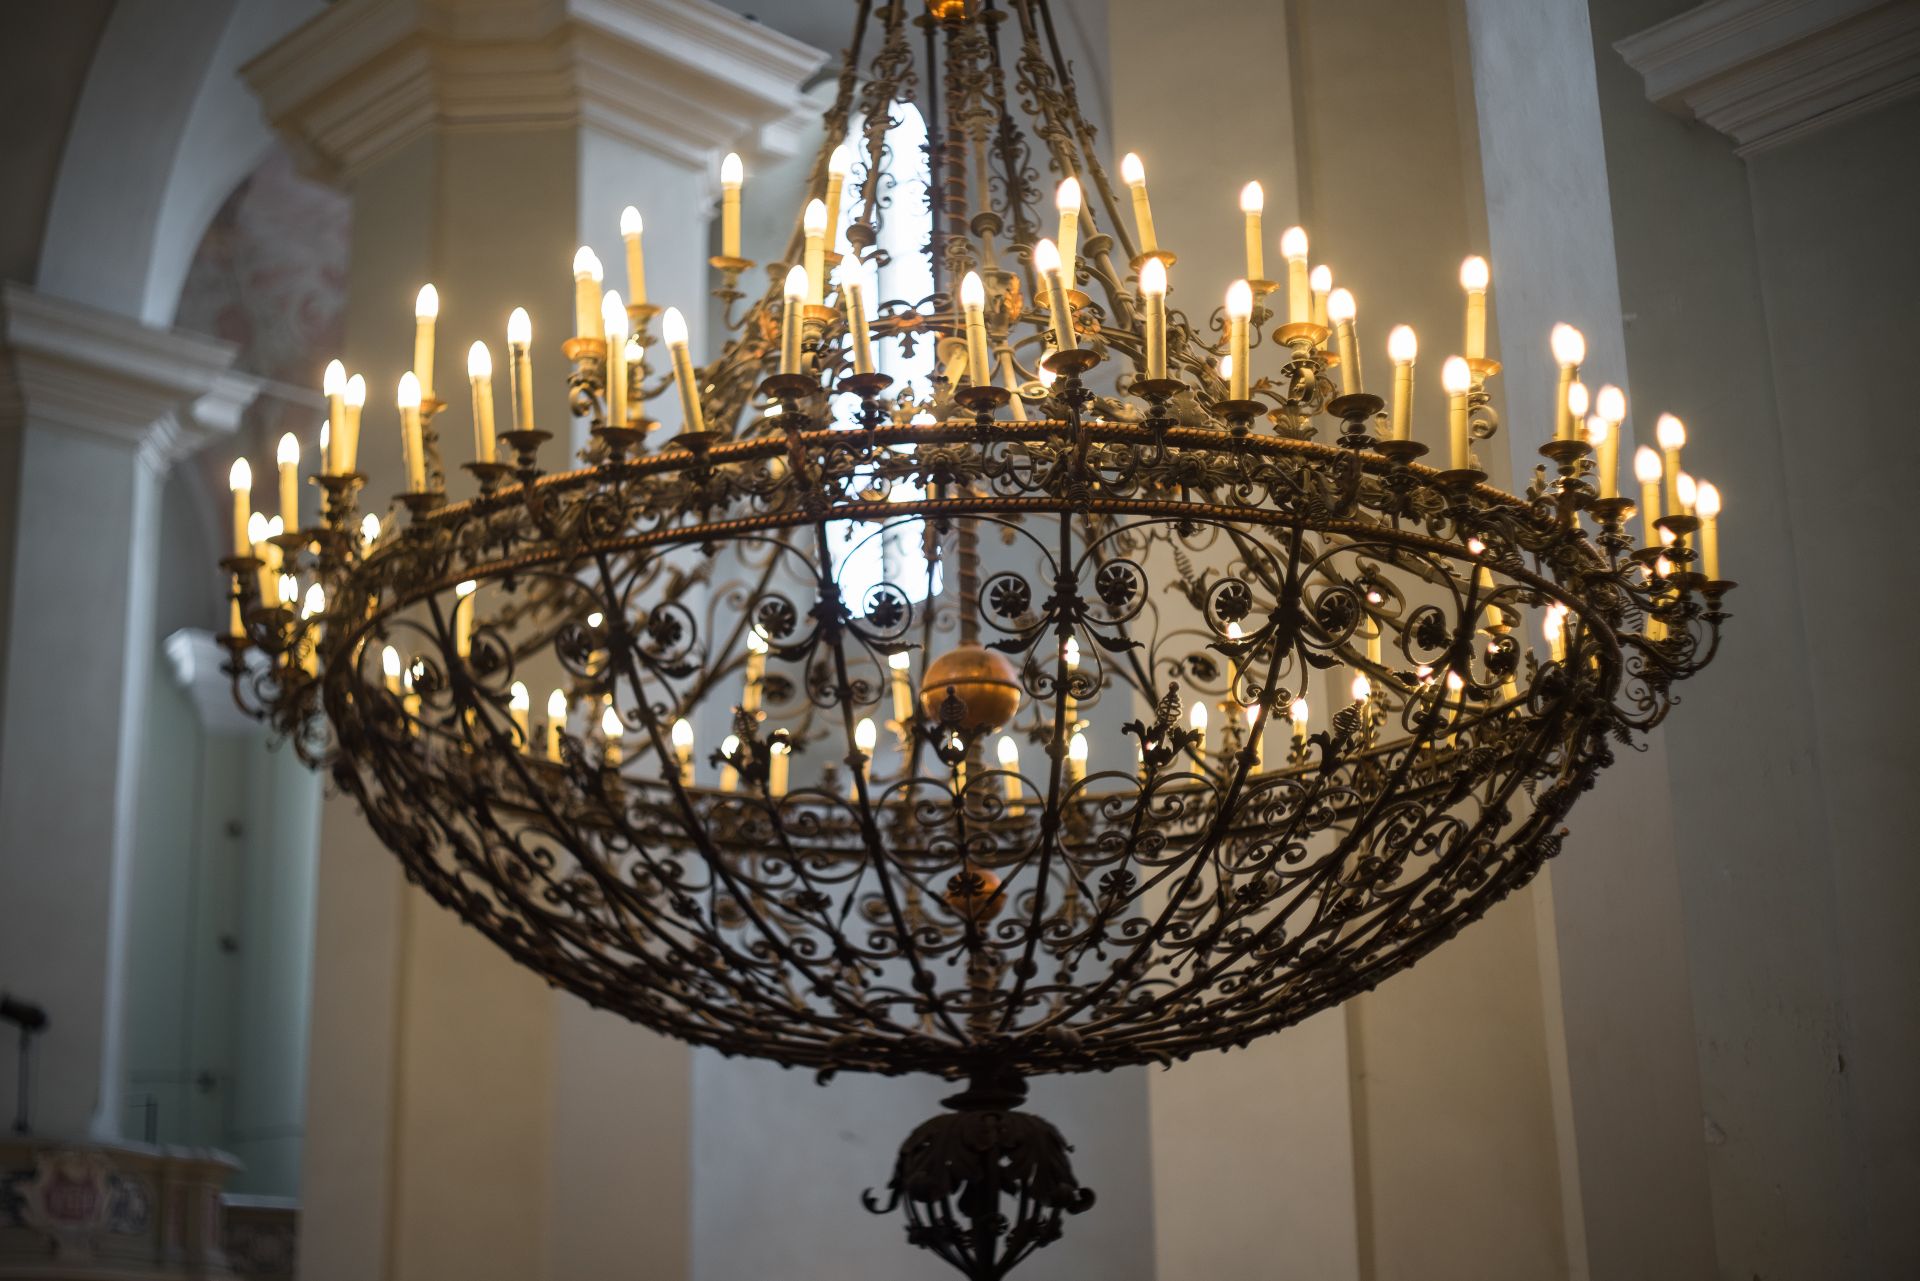 Chandelier at the Church of John the Baptist and St. John the Apostle and Evangelist in Vilnius. Photo by Povilas Jarmala, 2017